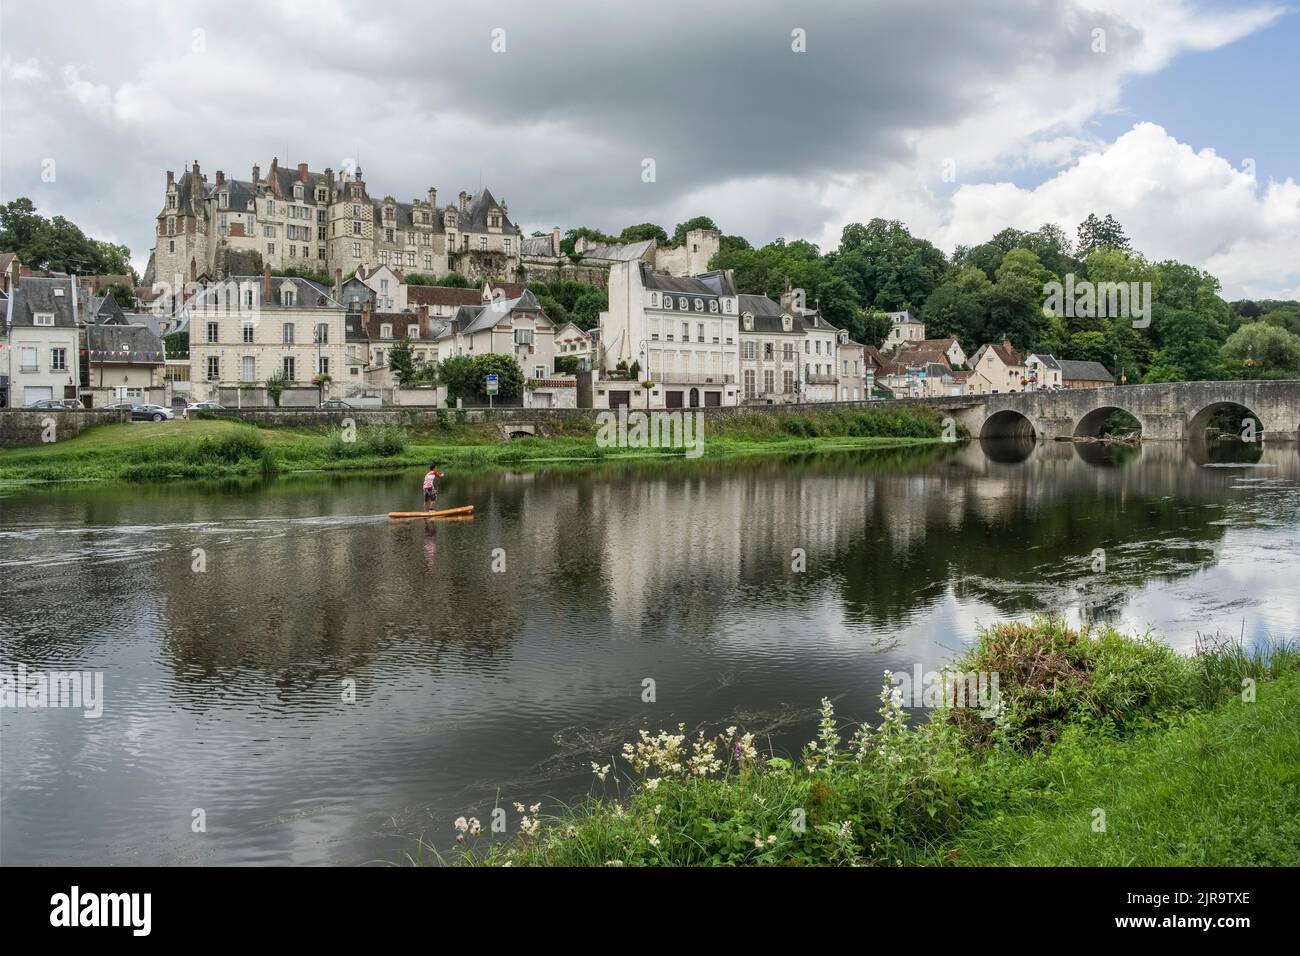 Saint-Aignan-sur-Cher (north central France): overview of the River Cher, the town and the chateau (castle) Stock Photo